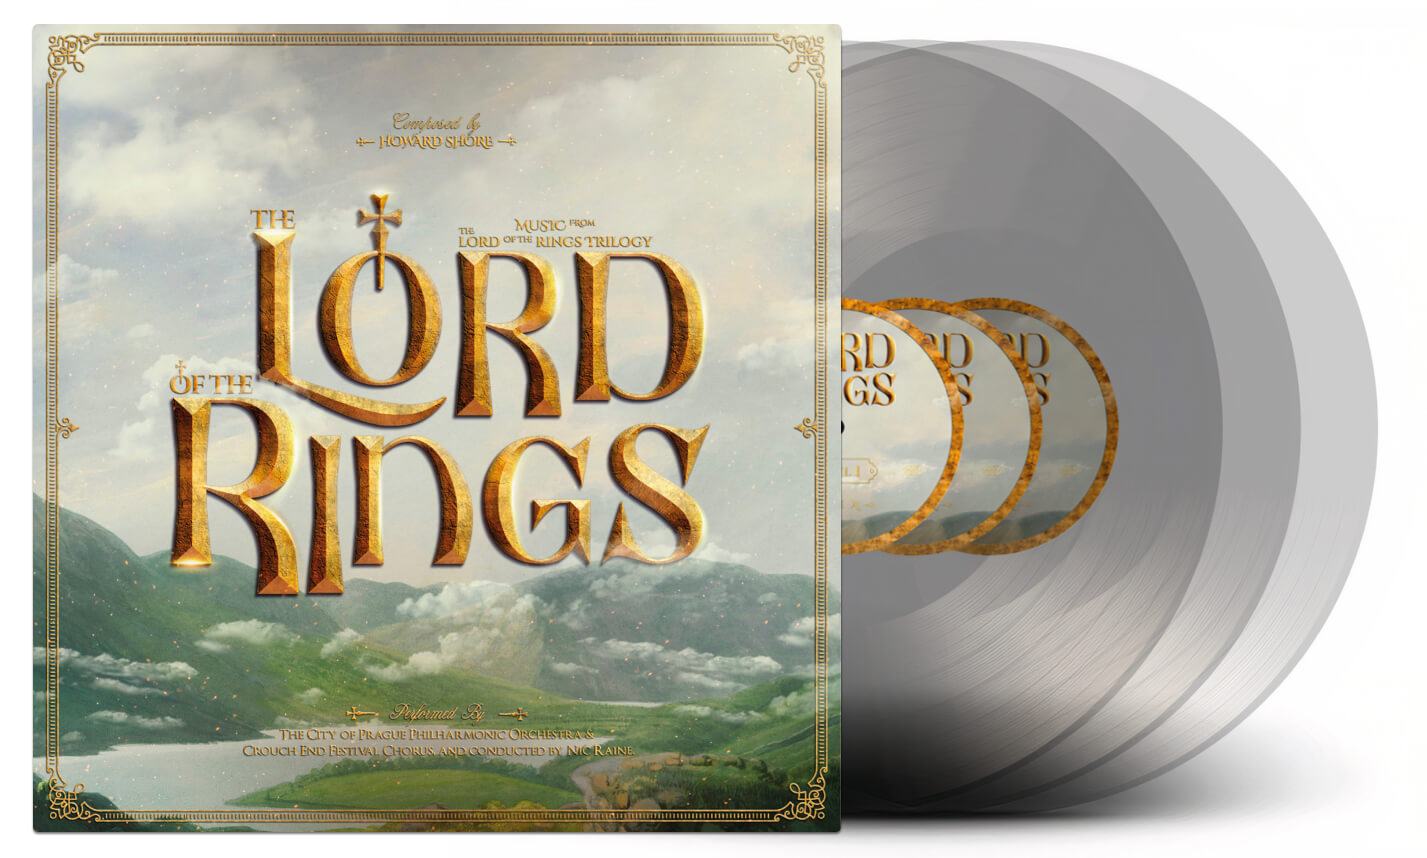 The City Of Prague Philharmonic Orchestra - Music From The Lord Of The Rings Trilogy - 3XLP - Clear Vinyl